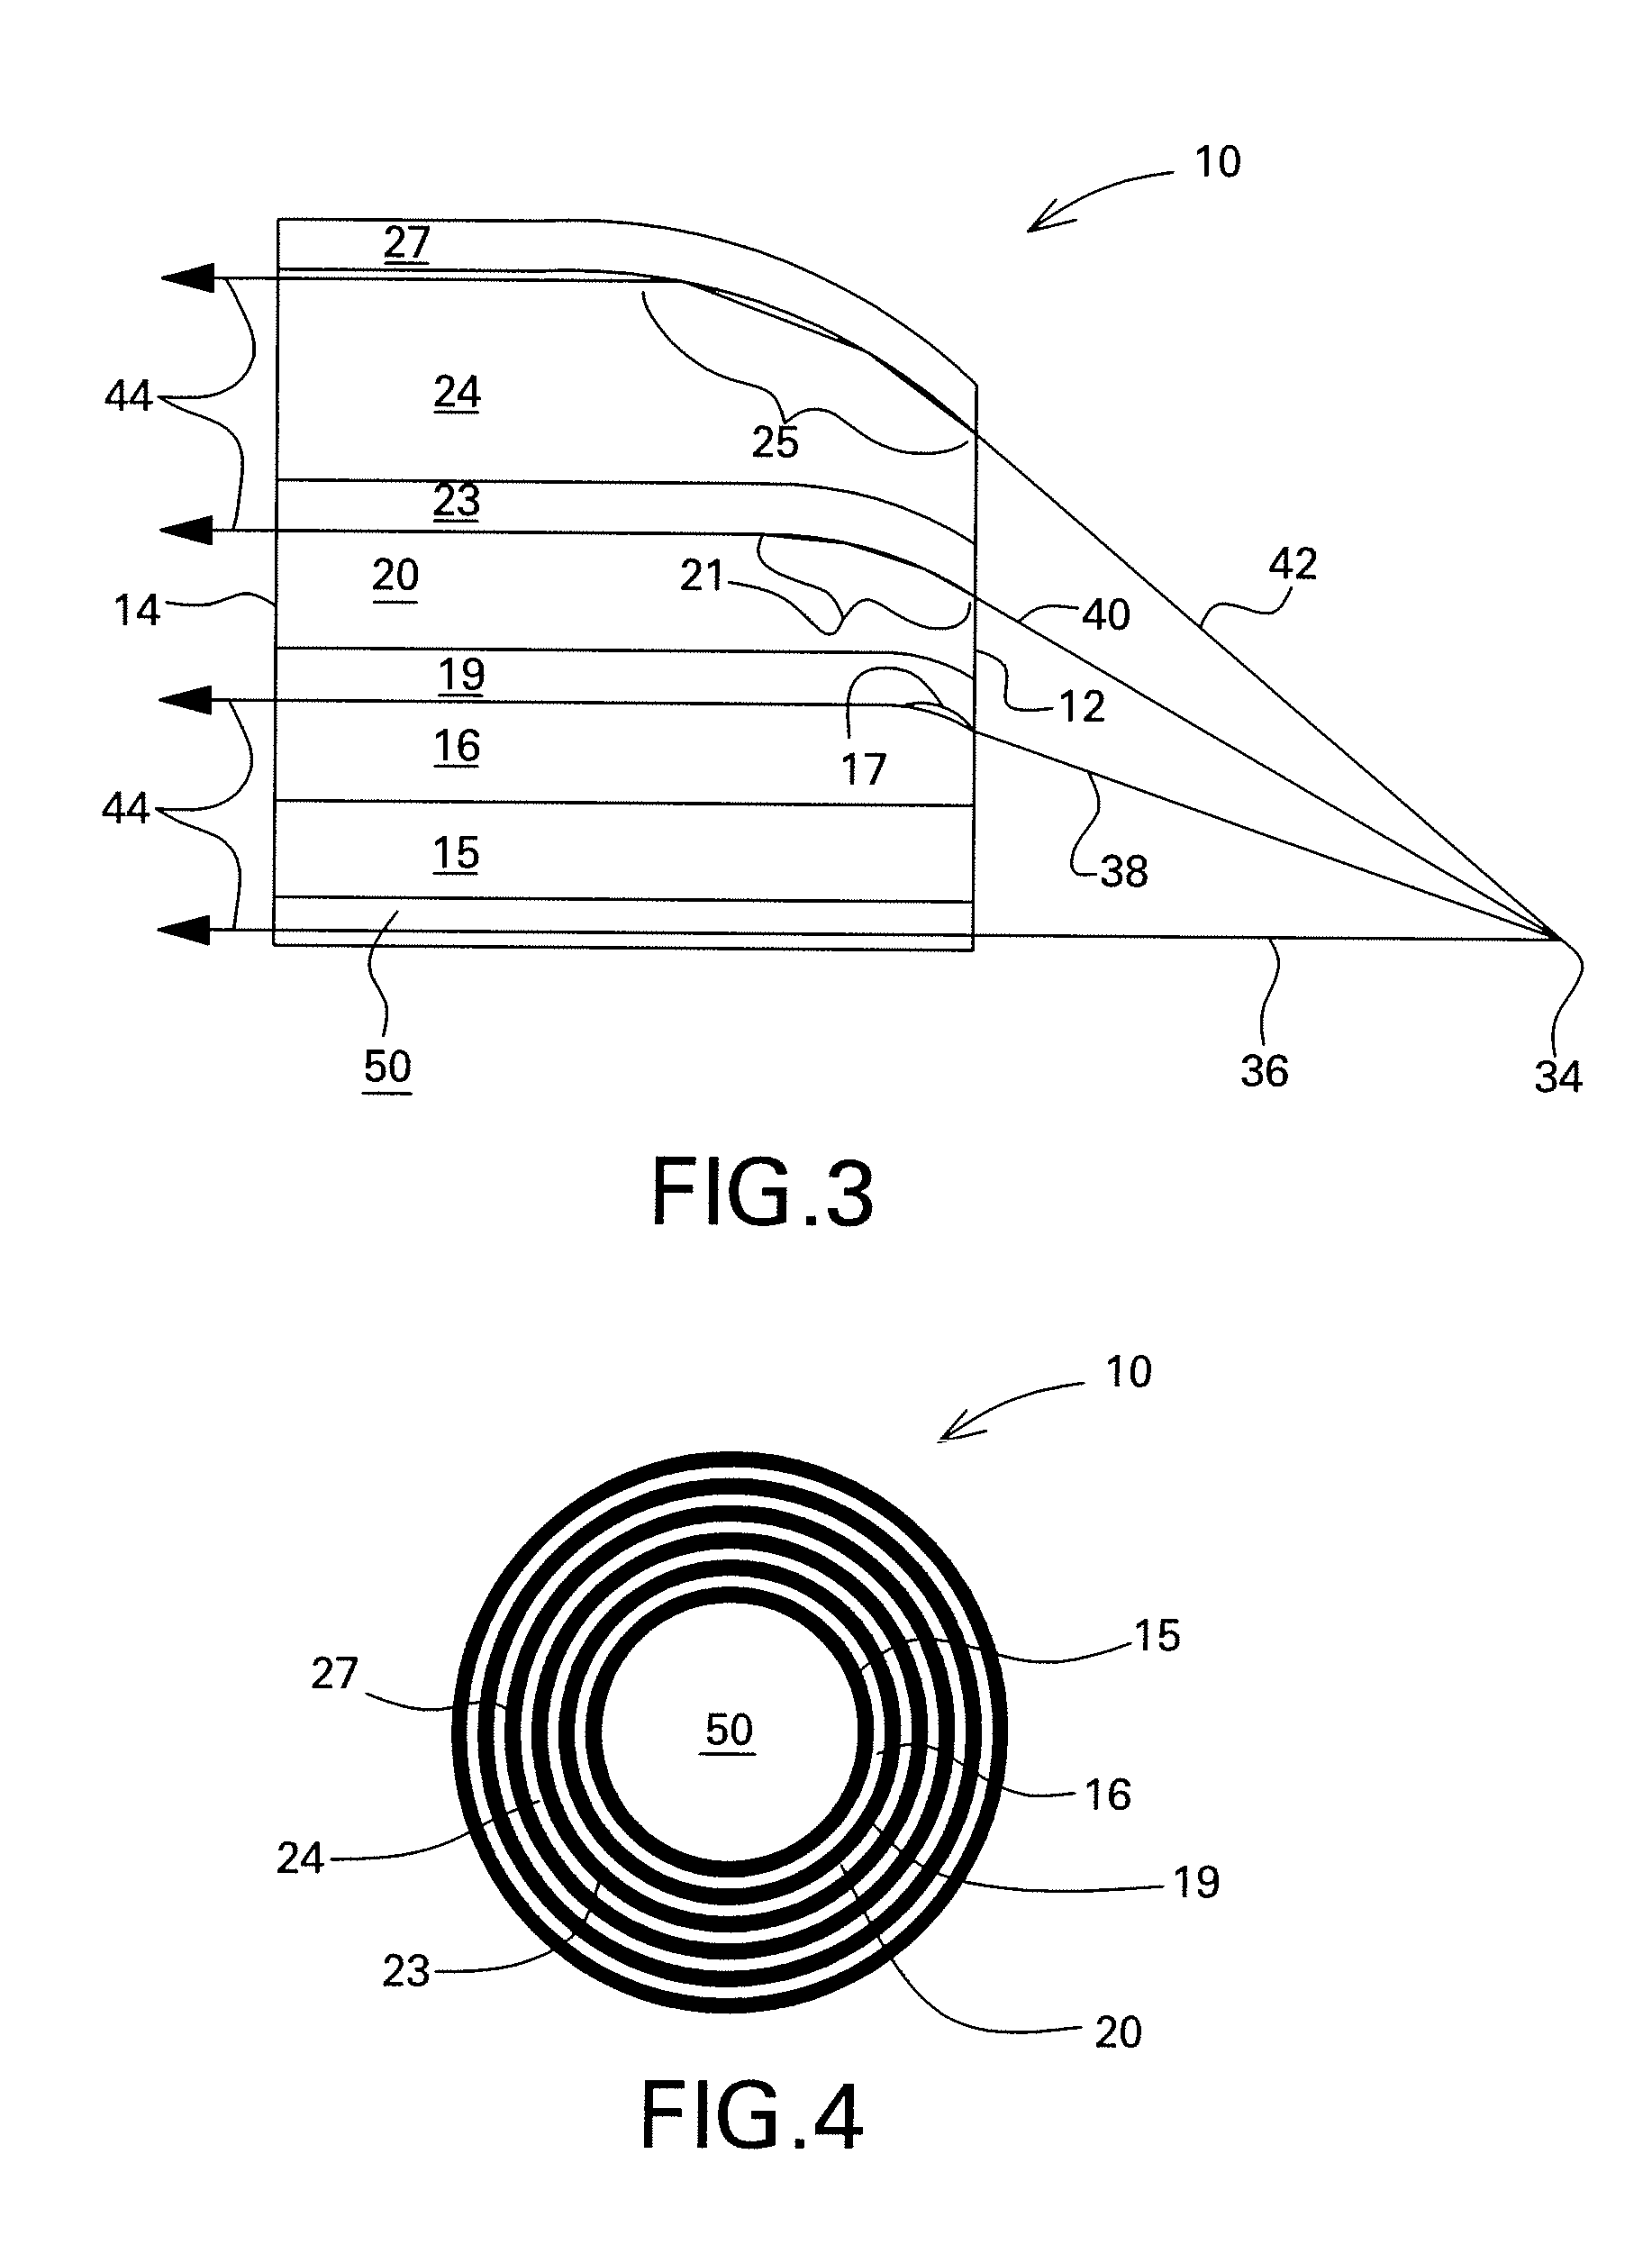 Multilayer optic device and system and method for making same